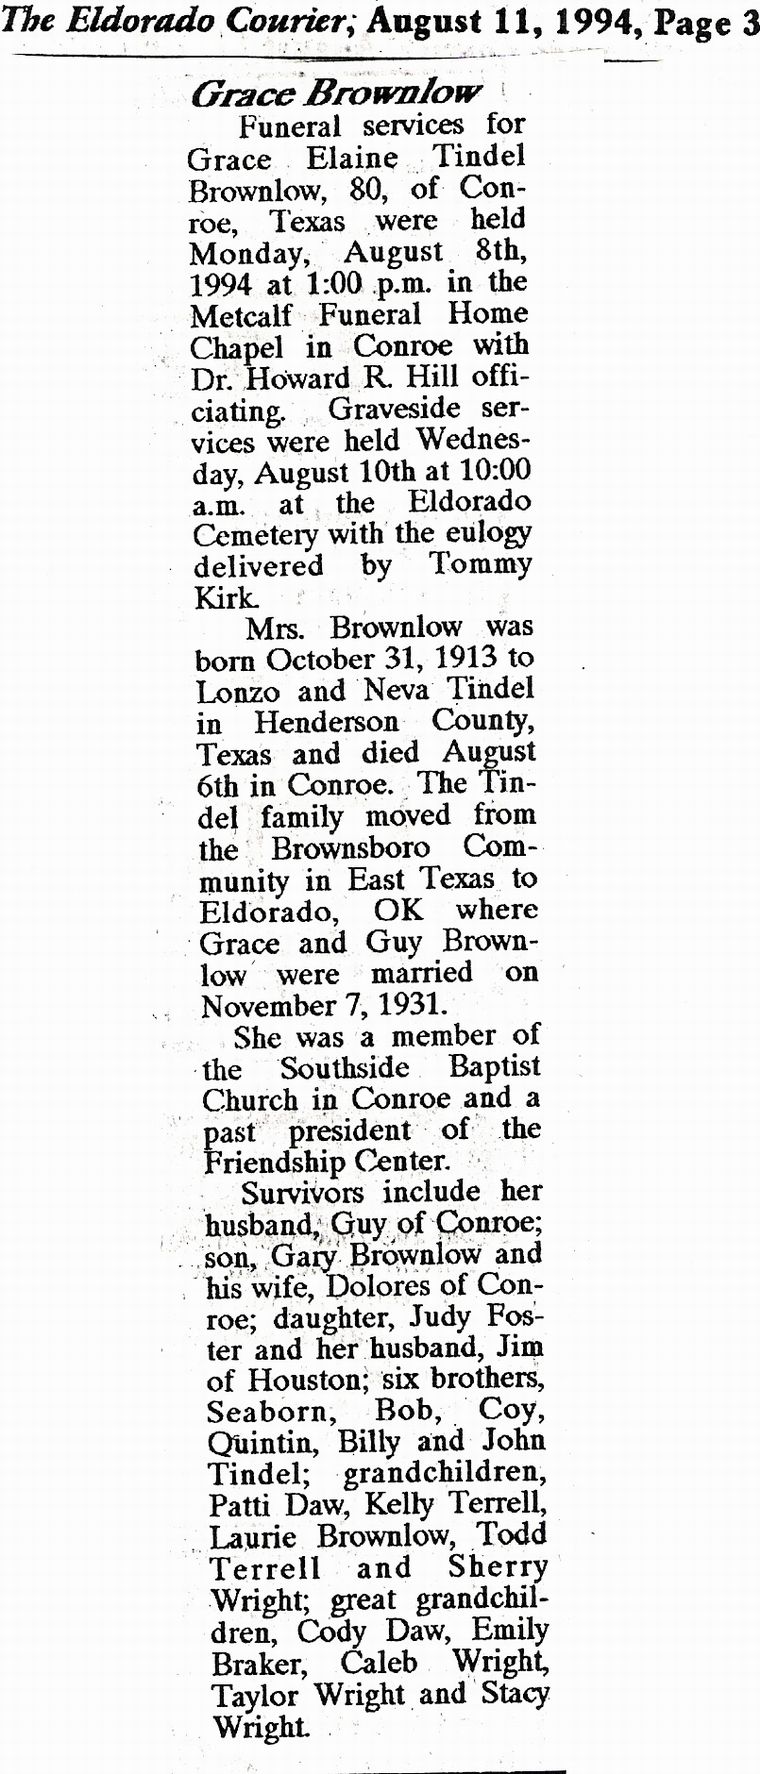 Obituary of Grace E. Tindell Brownlow